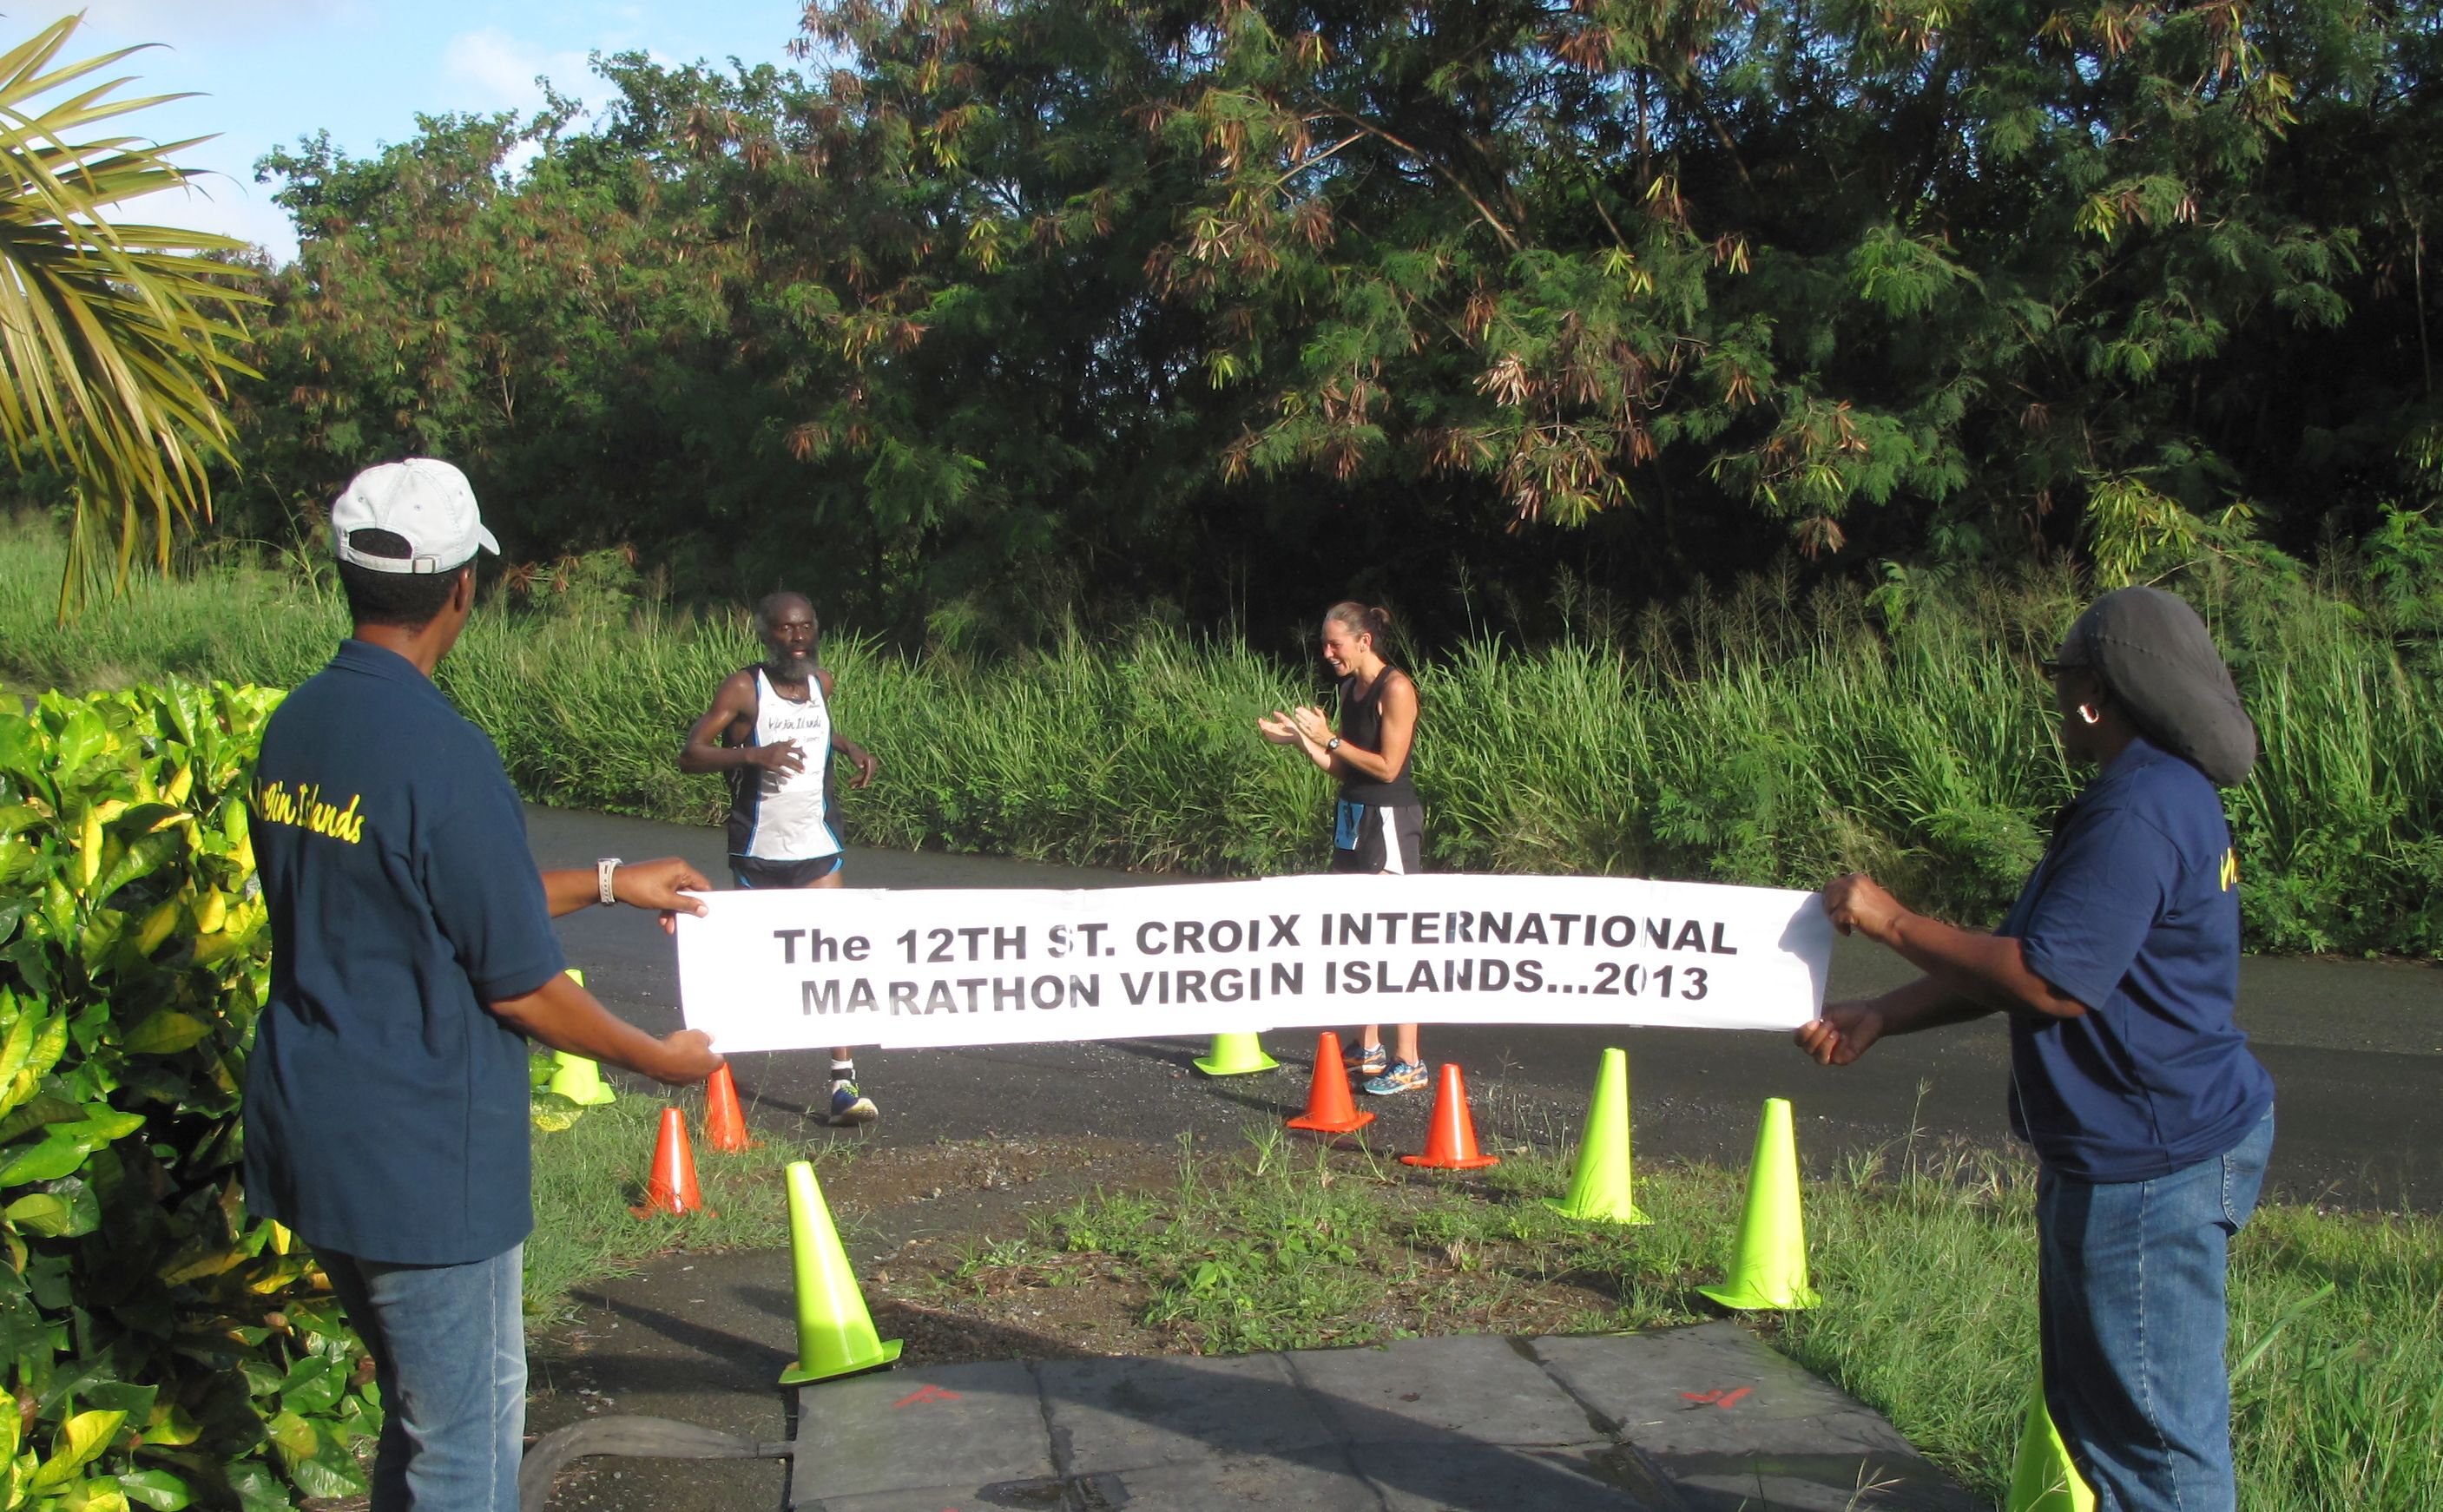 Calvin Dallas takes first place in the St. Croix Marathon (male)